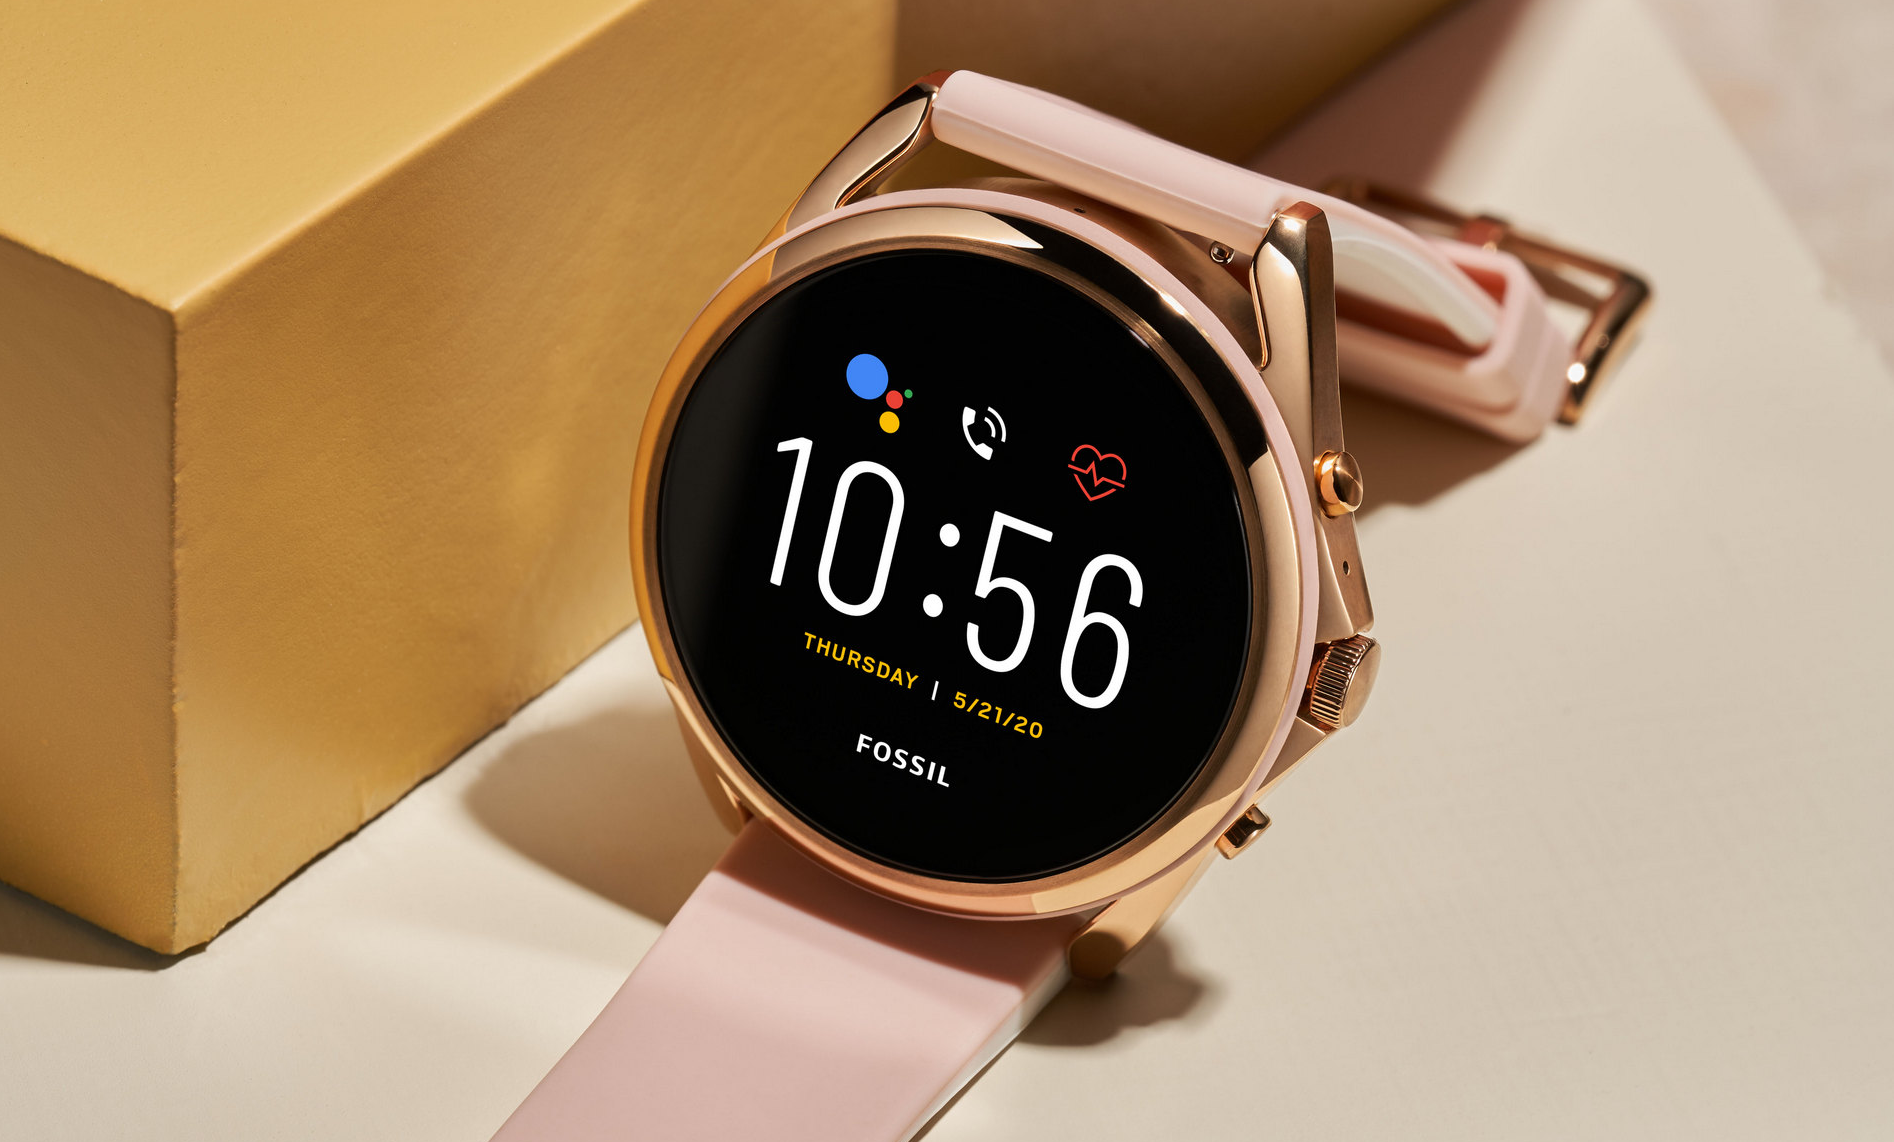 New Fossil OS smartwatches appear at the FCC, likely the Fossil Gen 6 and a Michele Michael Kors - NotebookCheck.net News